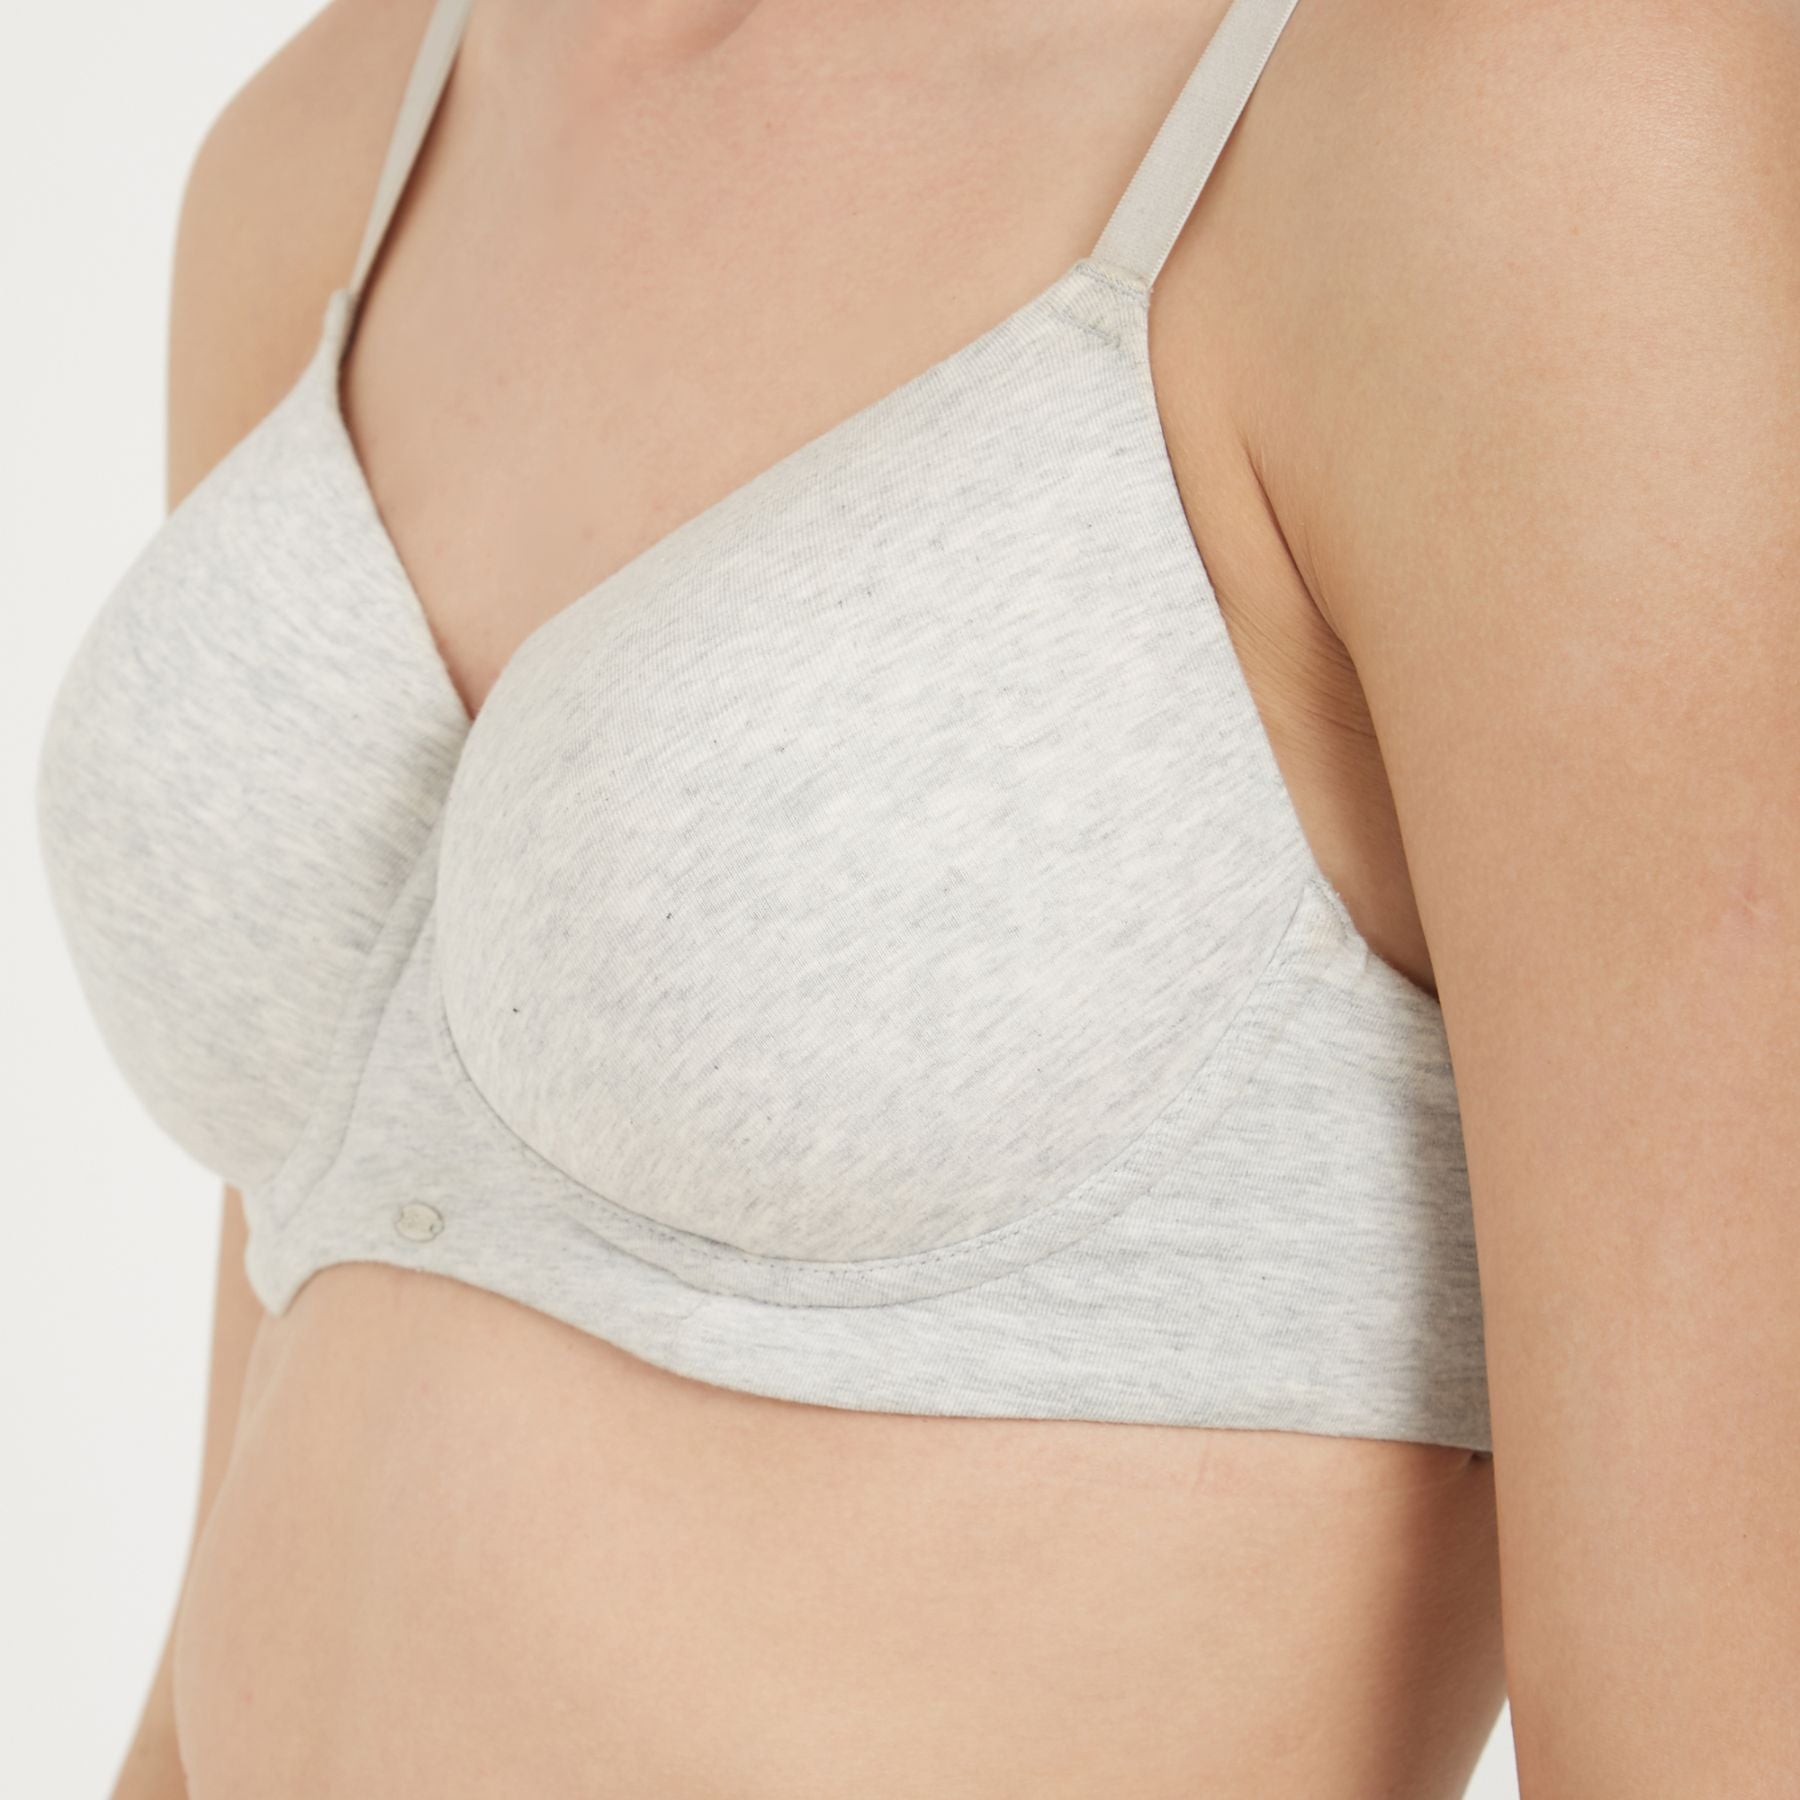 Full Coverage Padded Non Wired T-shirt Bra (PACK OF 2)-COMBO CB-124